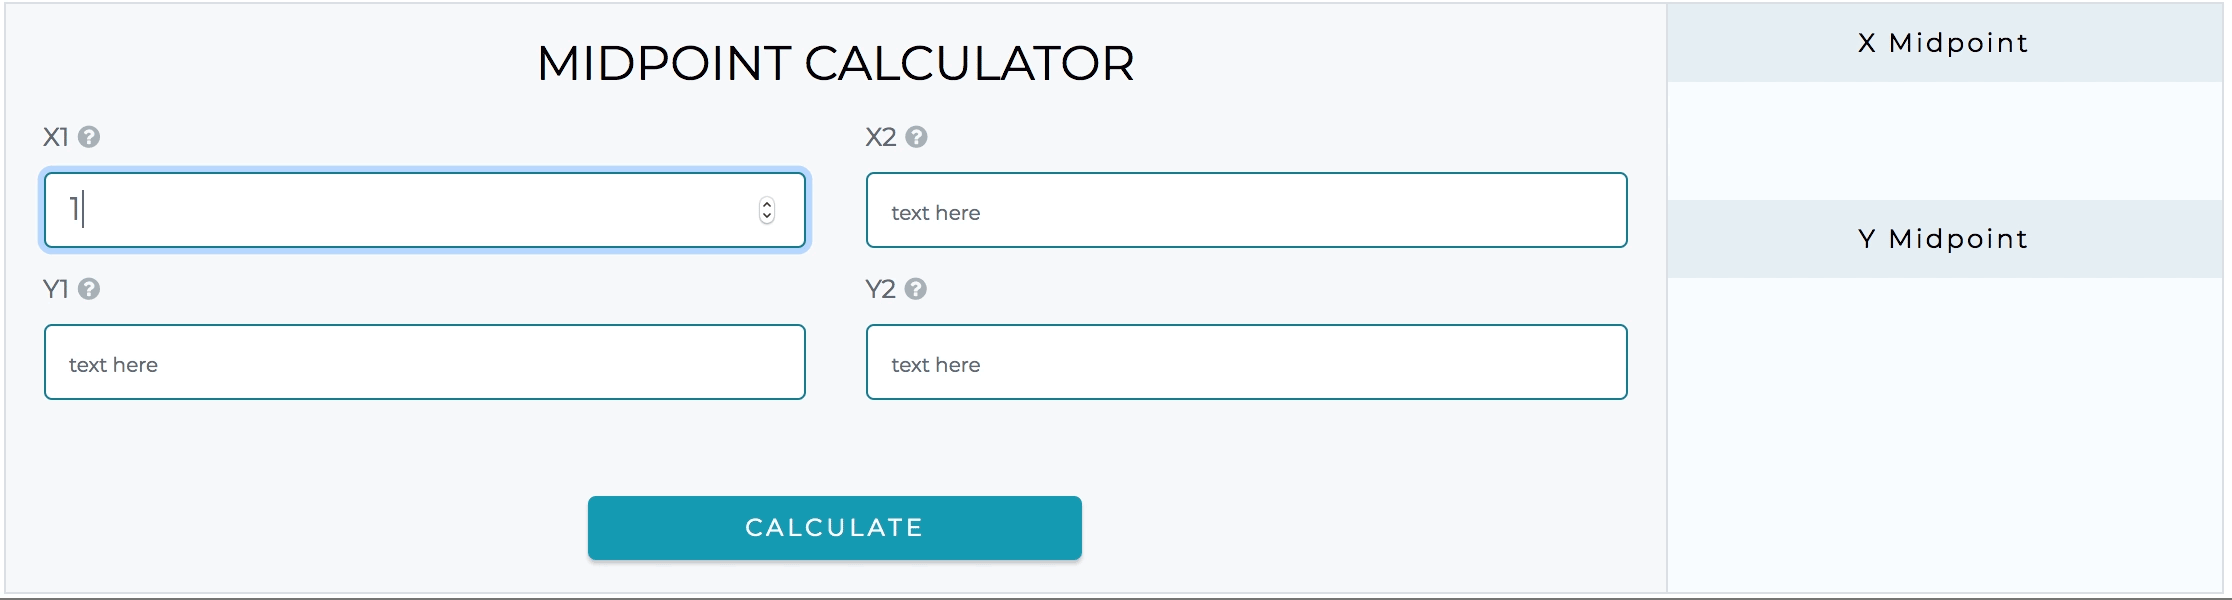 How to use midpoint calculator